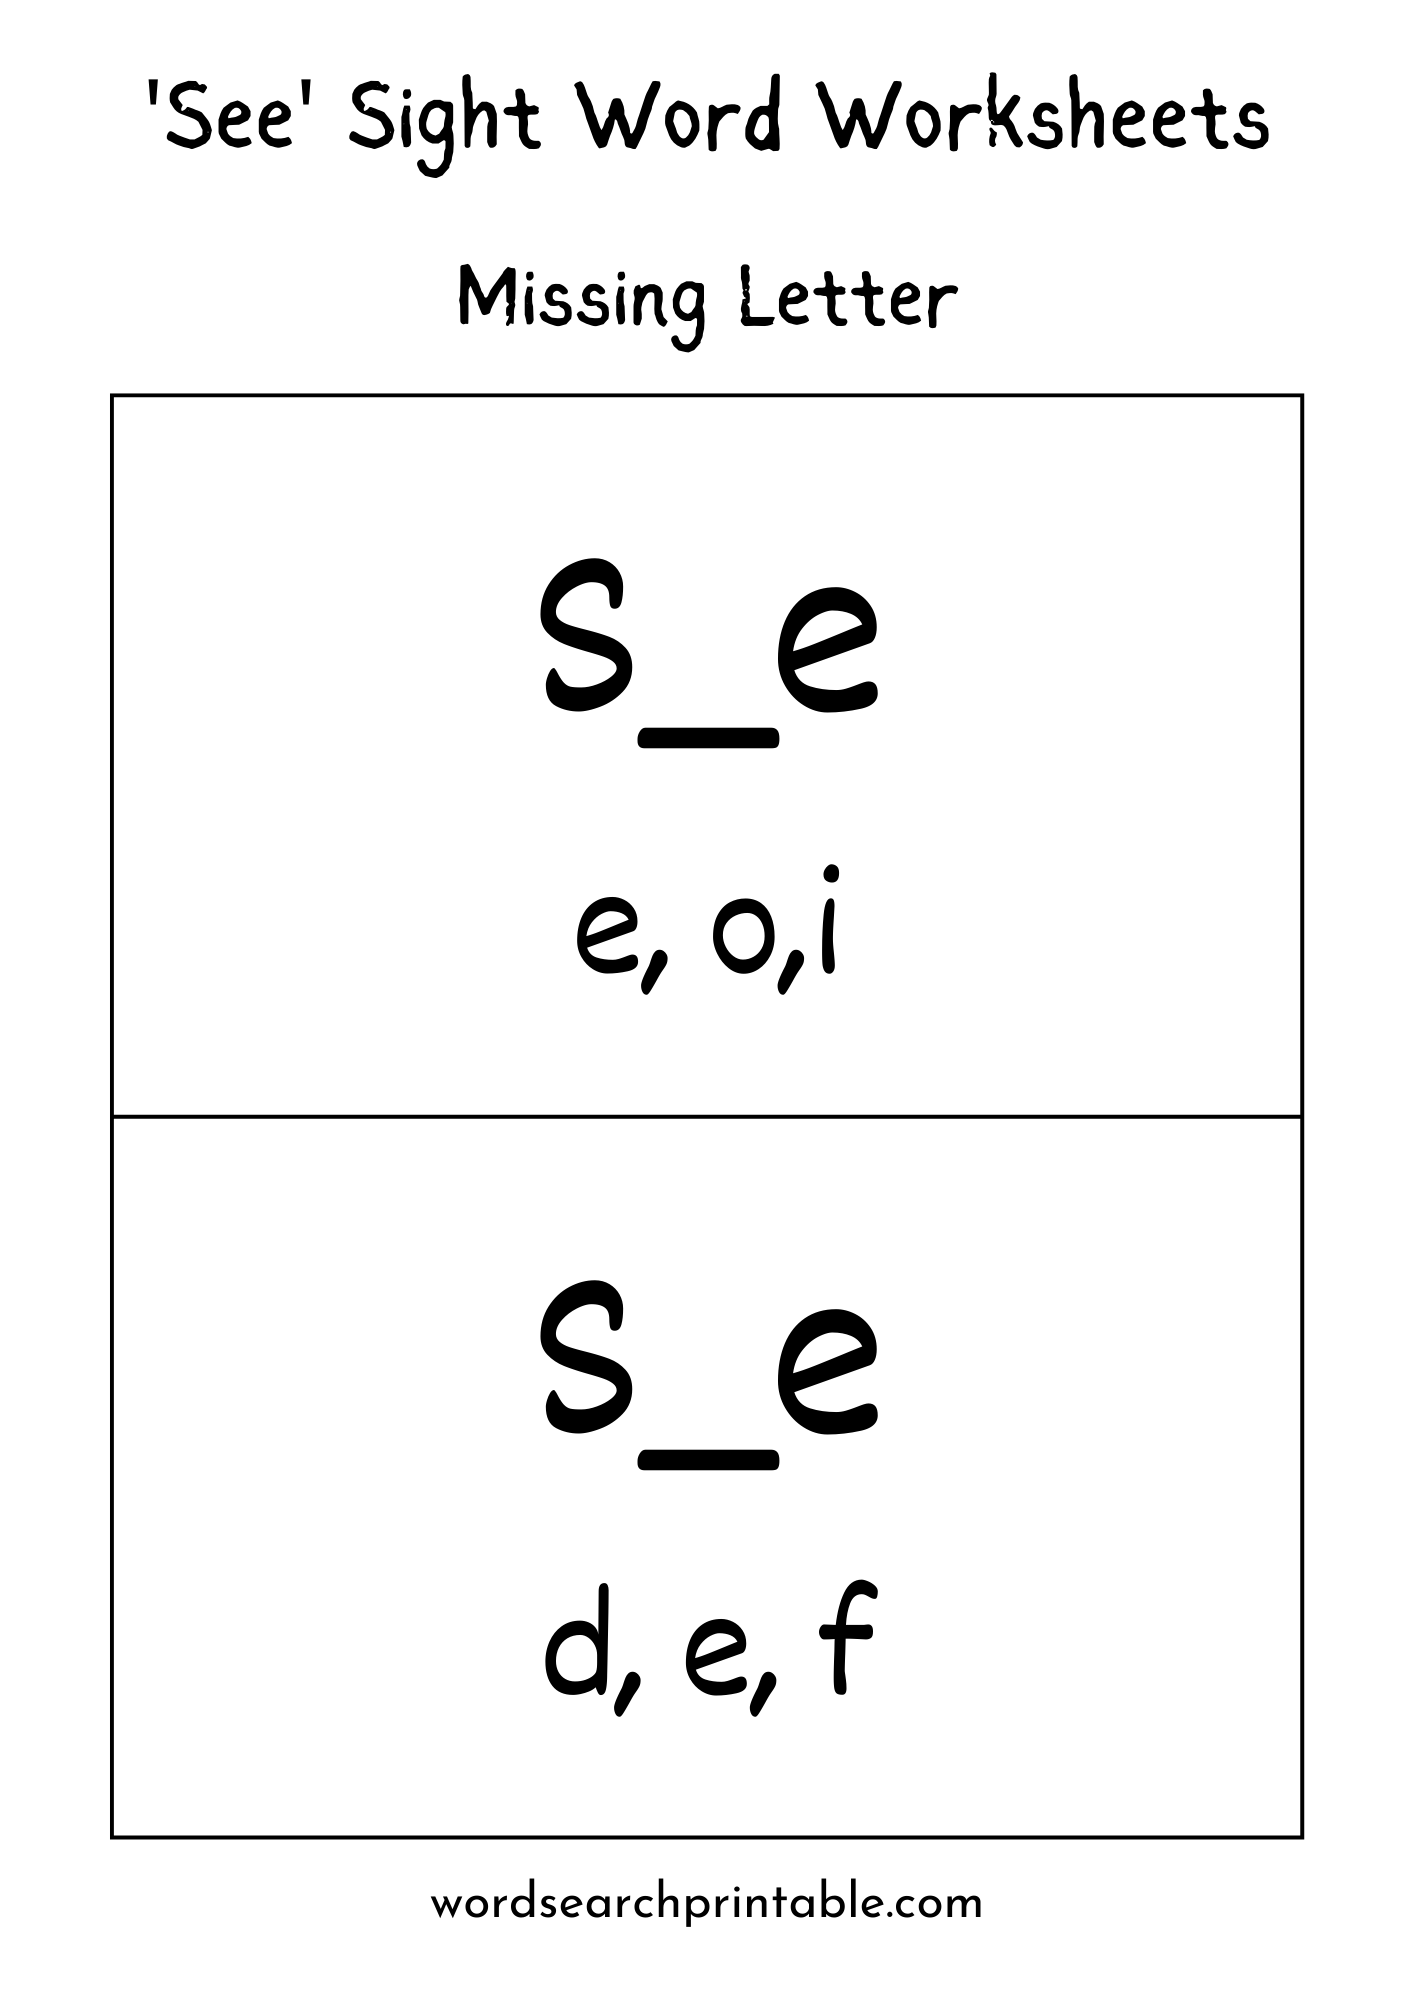 So, here come's the toughest one! The memory game! In this missing letter in the word See worksheet, let your child fill in the blanks with missing letters that form the word "See".